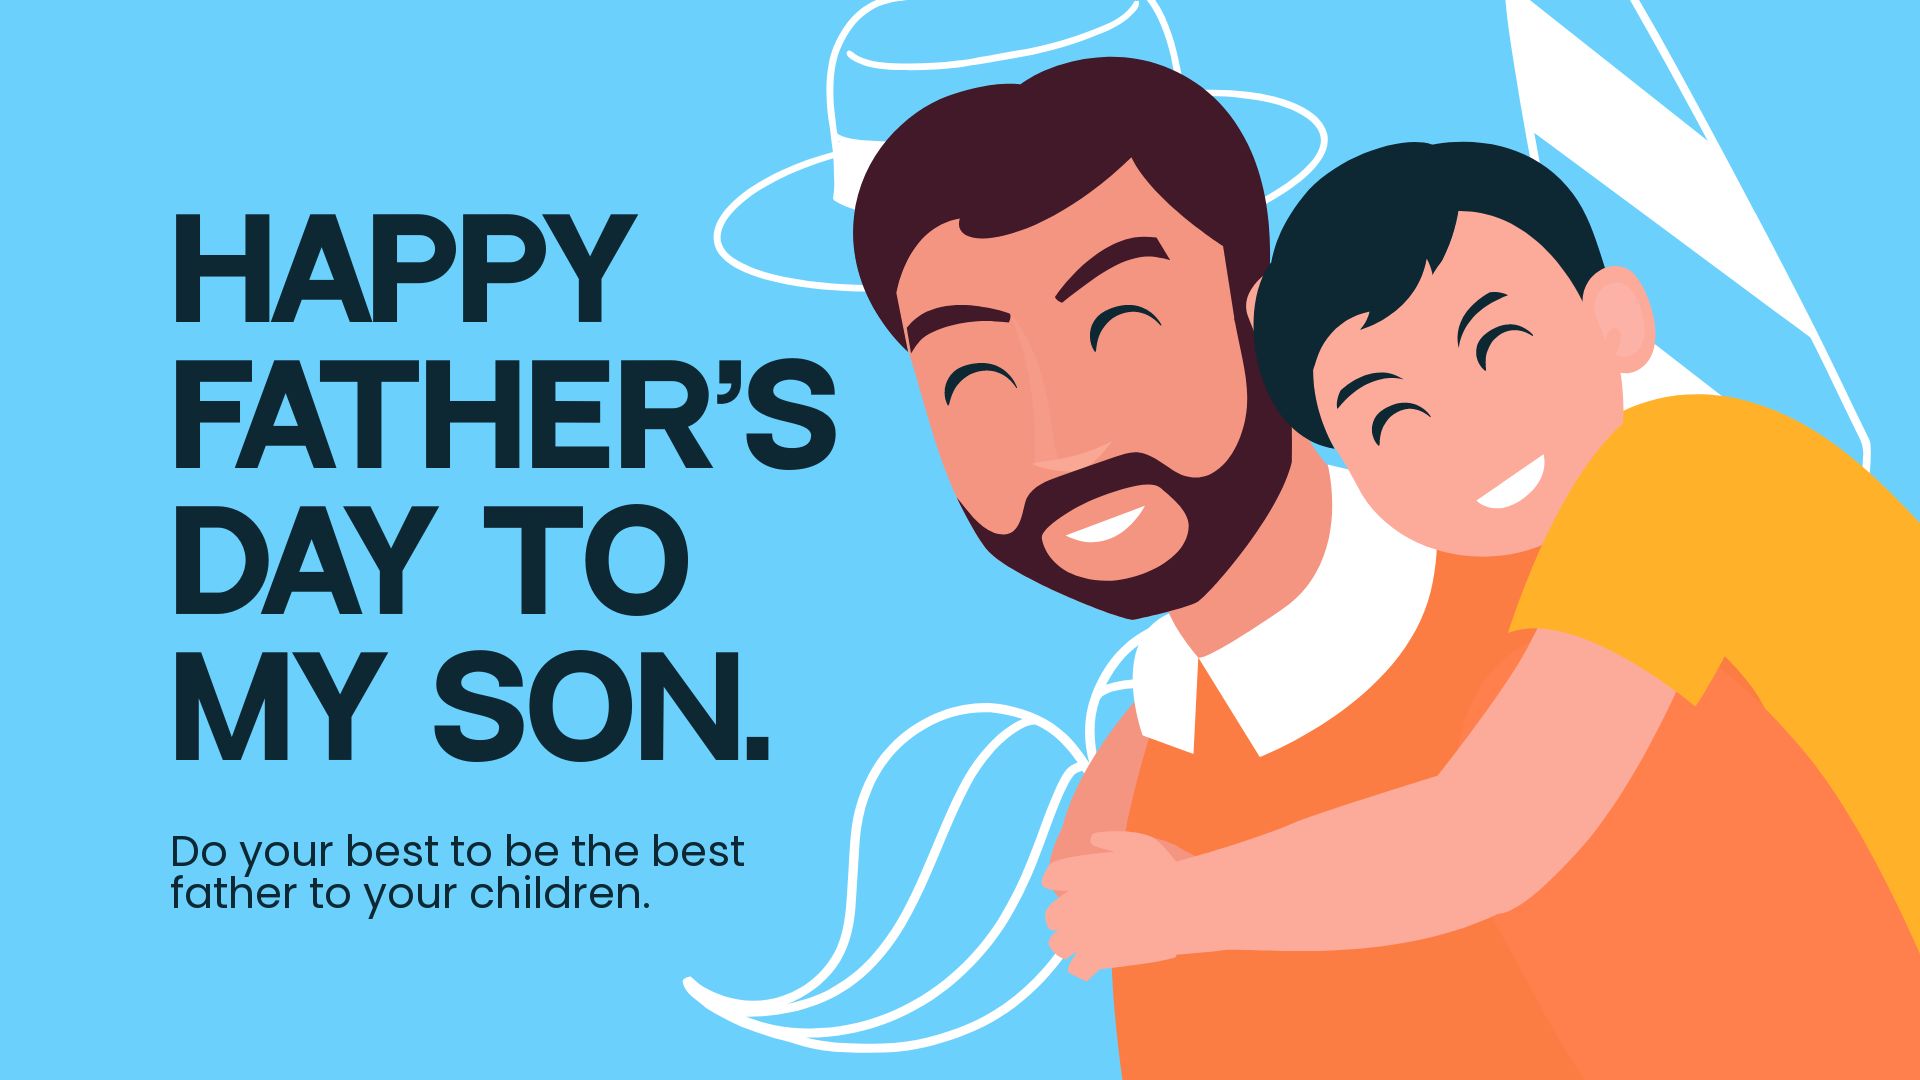 Free Happy Father's Day To My Son Image - Download in JPG